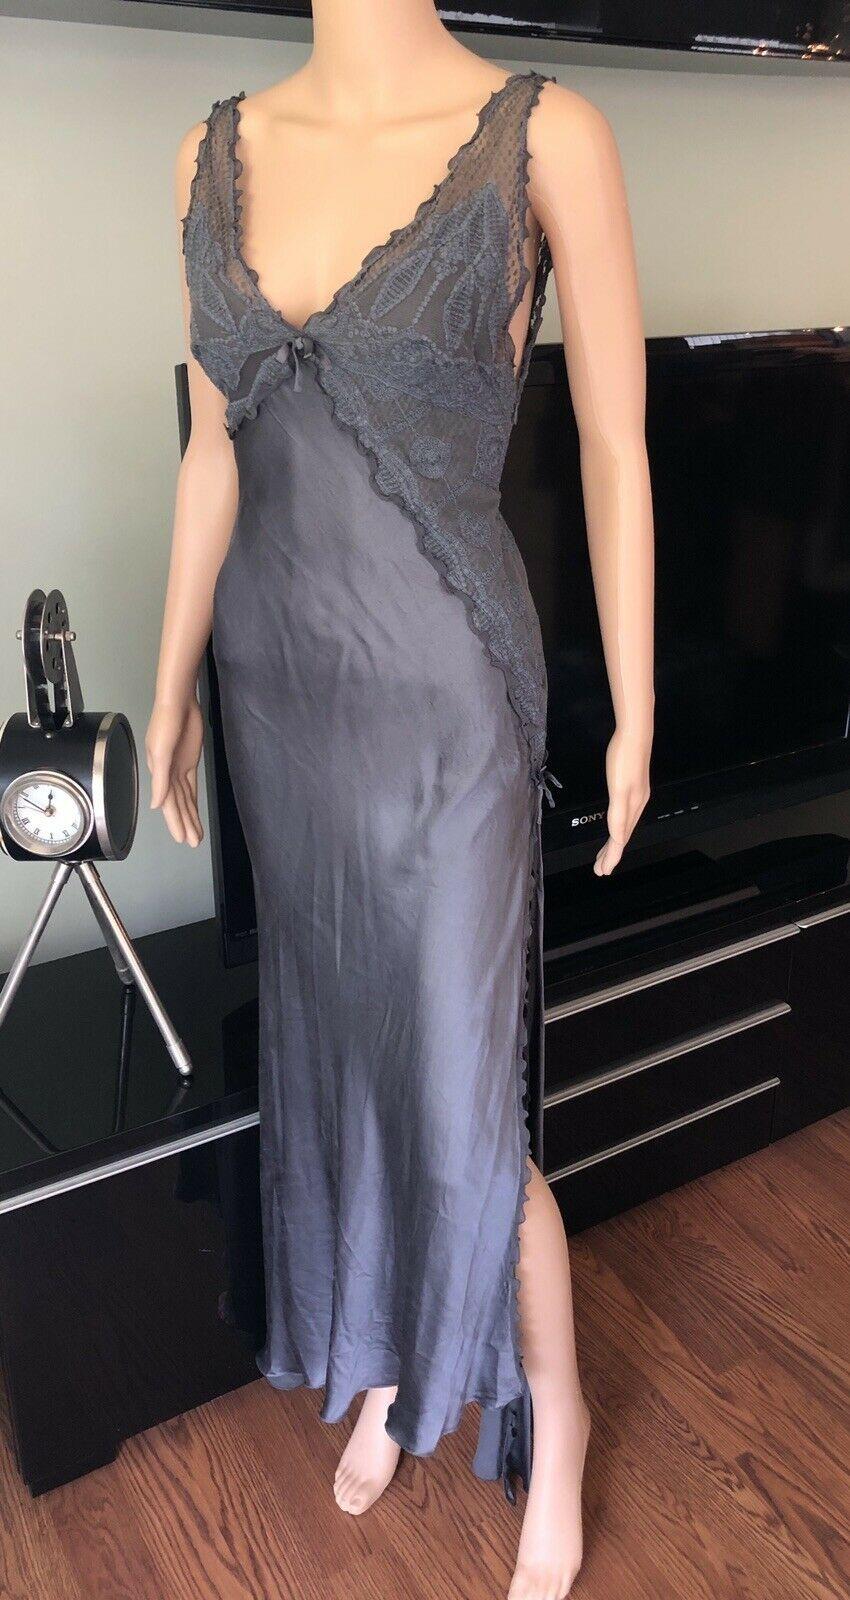 GIANNI VERSACE S/S 1997 Runway Vintage Satin Lace Embroidered Gown  In Good Condition For Sale In Naples, FL